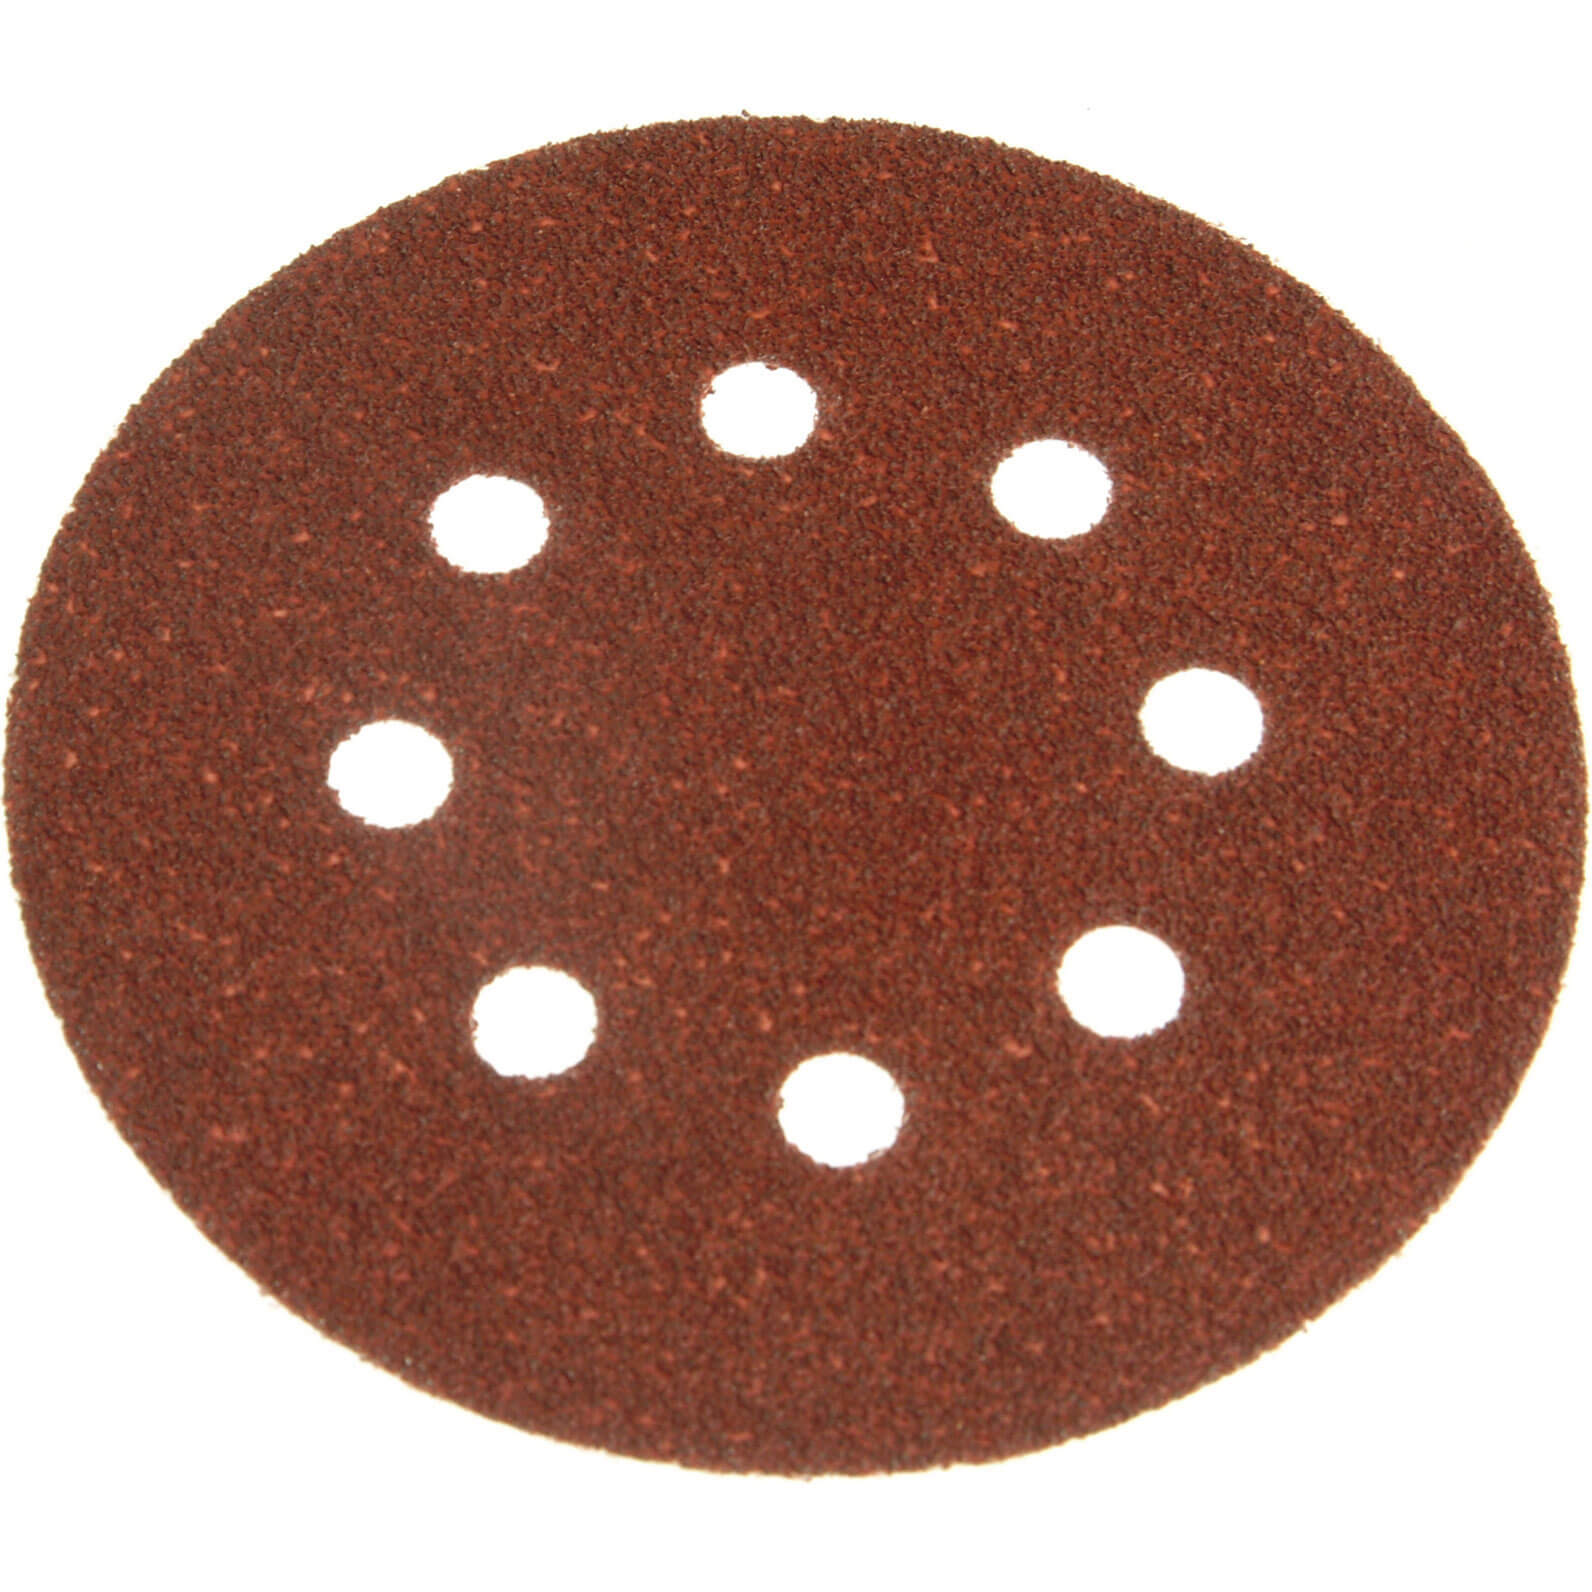 Image of Black and Decker Piranha Quick Fit ROS Sanding Discs 125mm 125mm Assorted Pack of 5